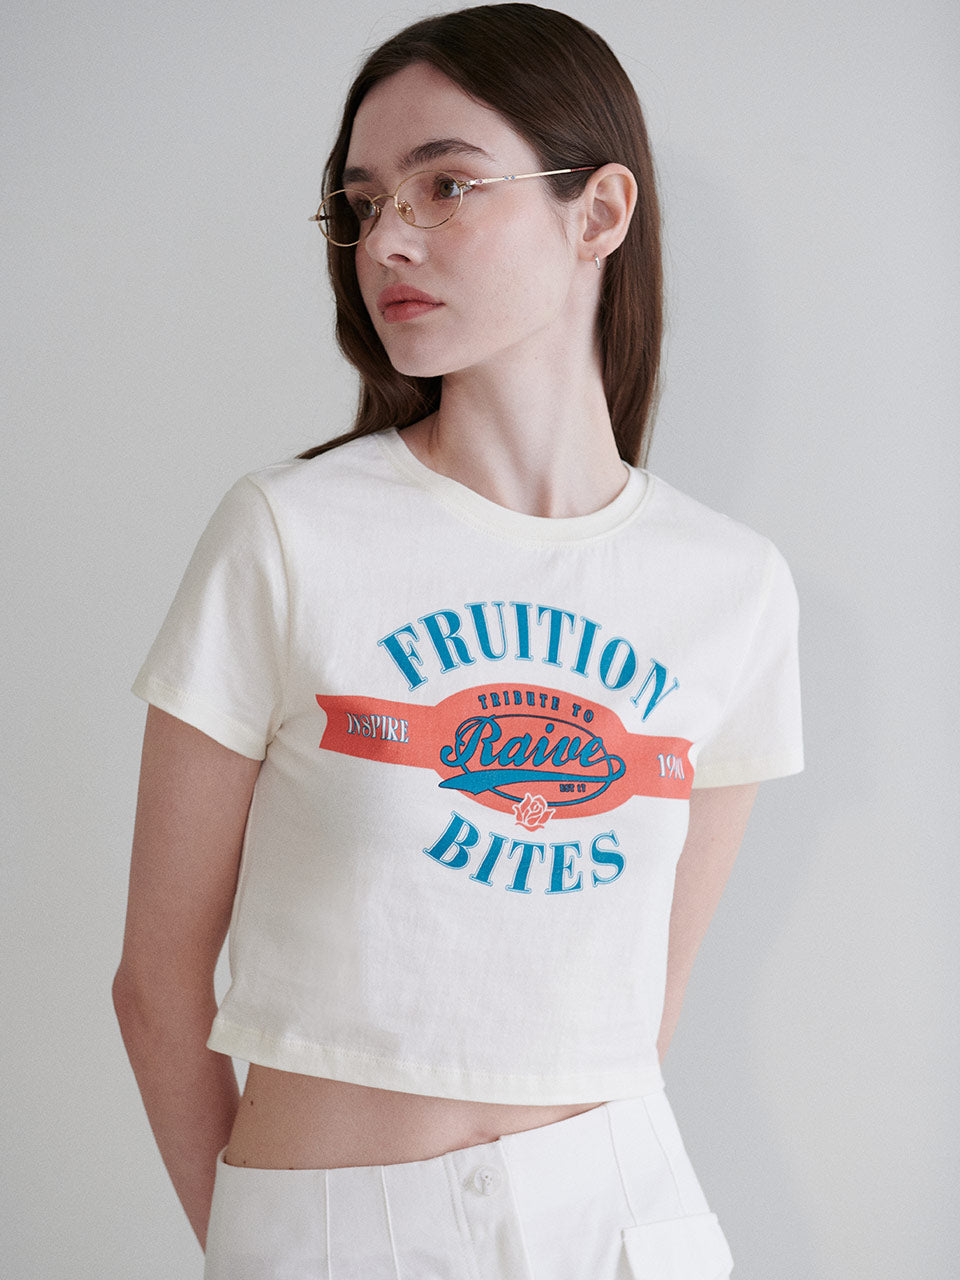 Retro Graphic T-Shirt in Ivory